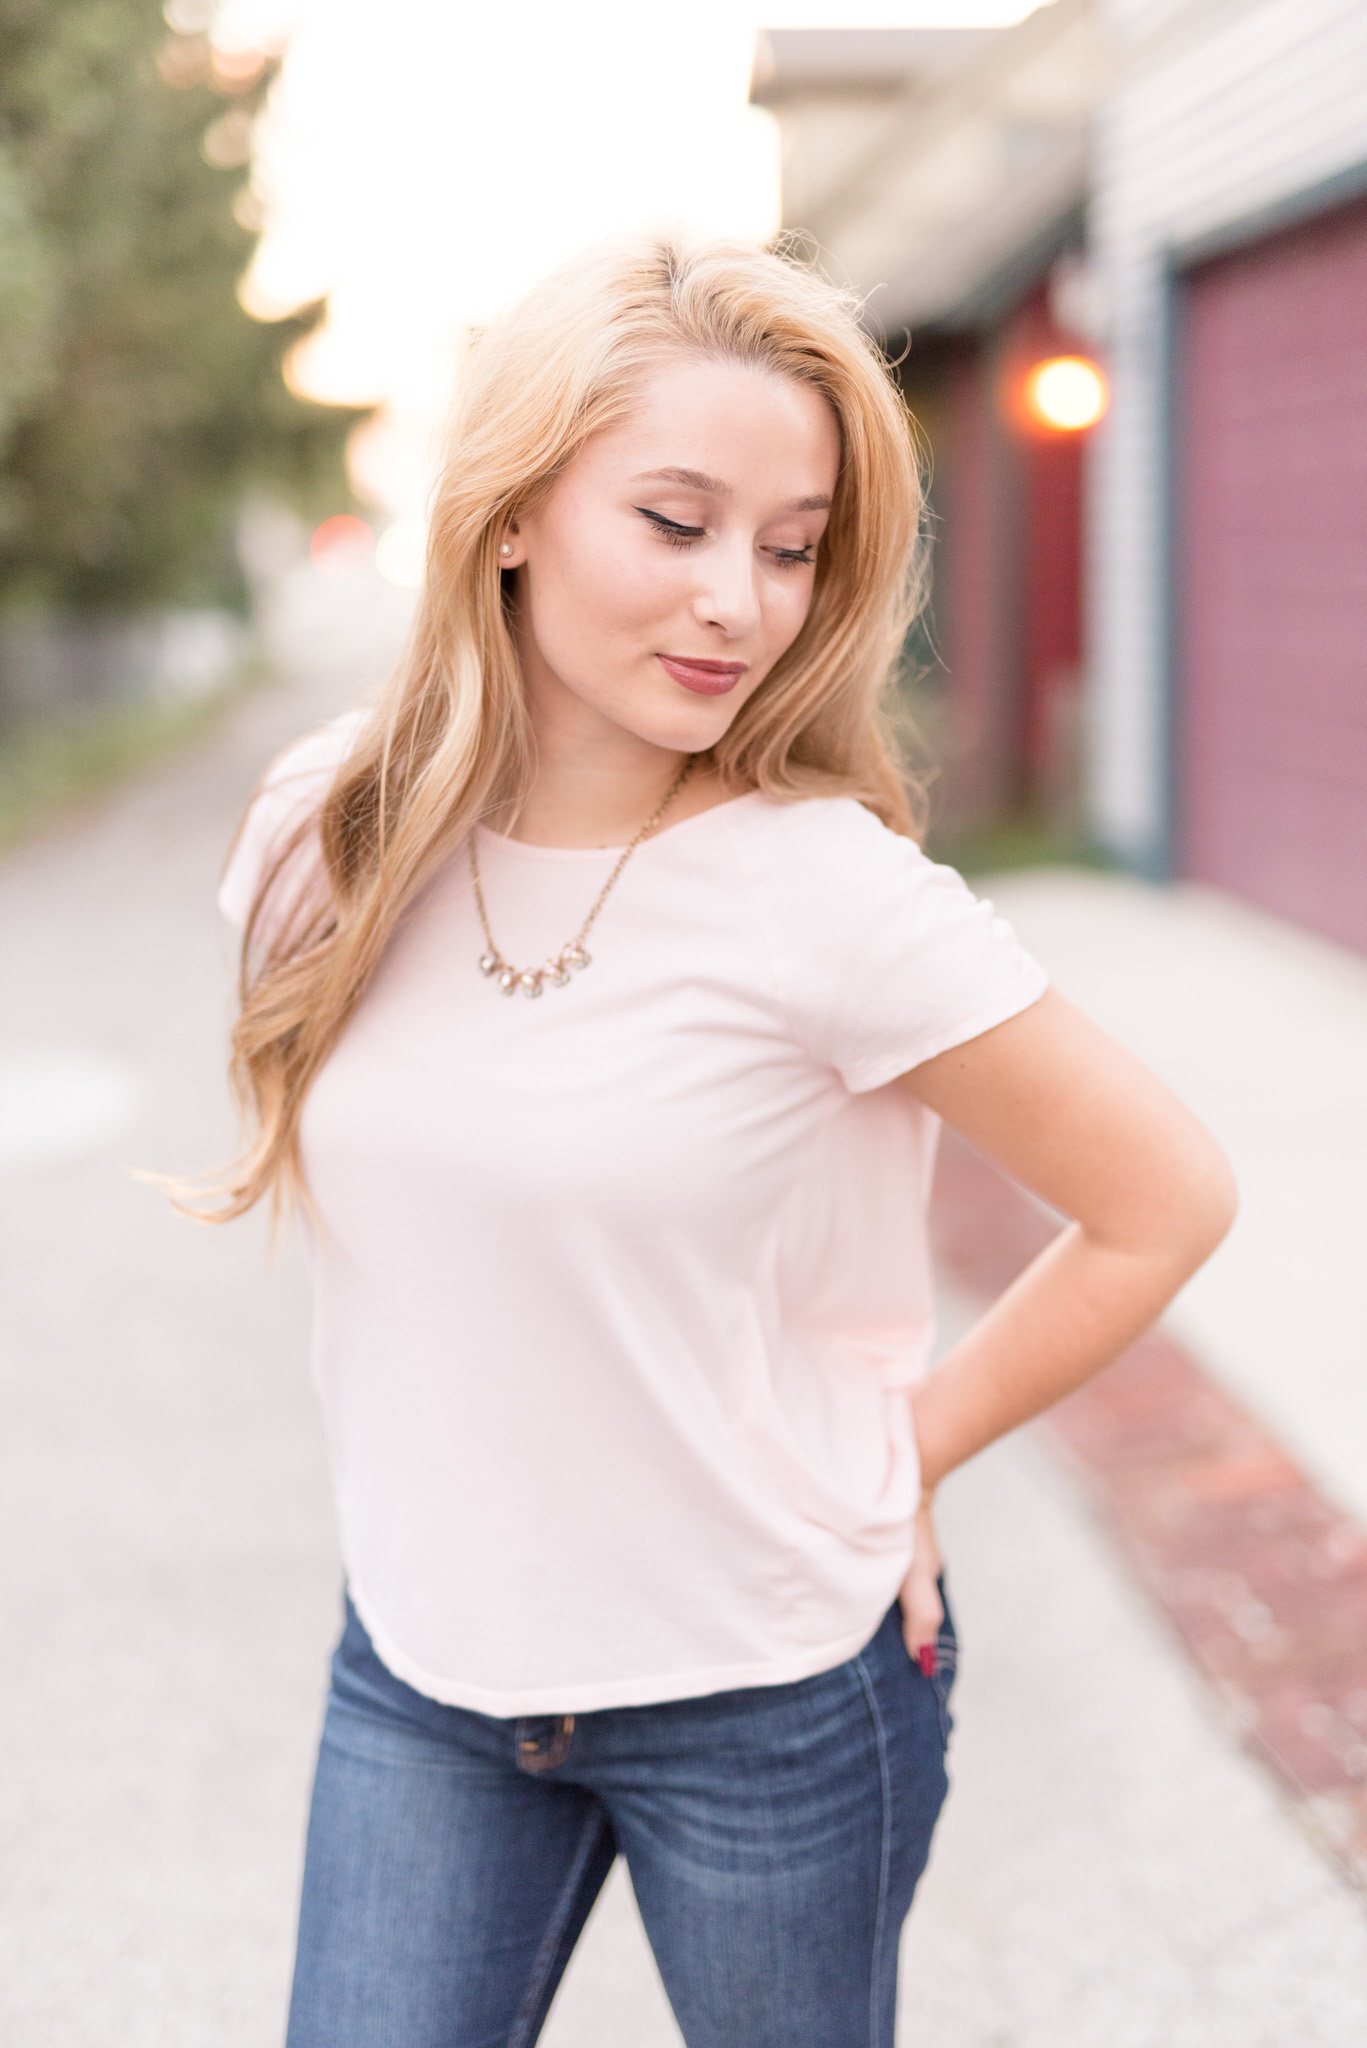 Downtown-Sunset-Senior-Pictures 0016